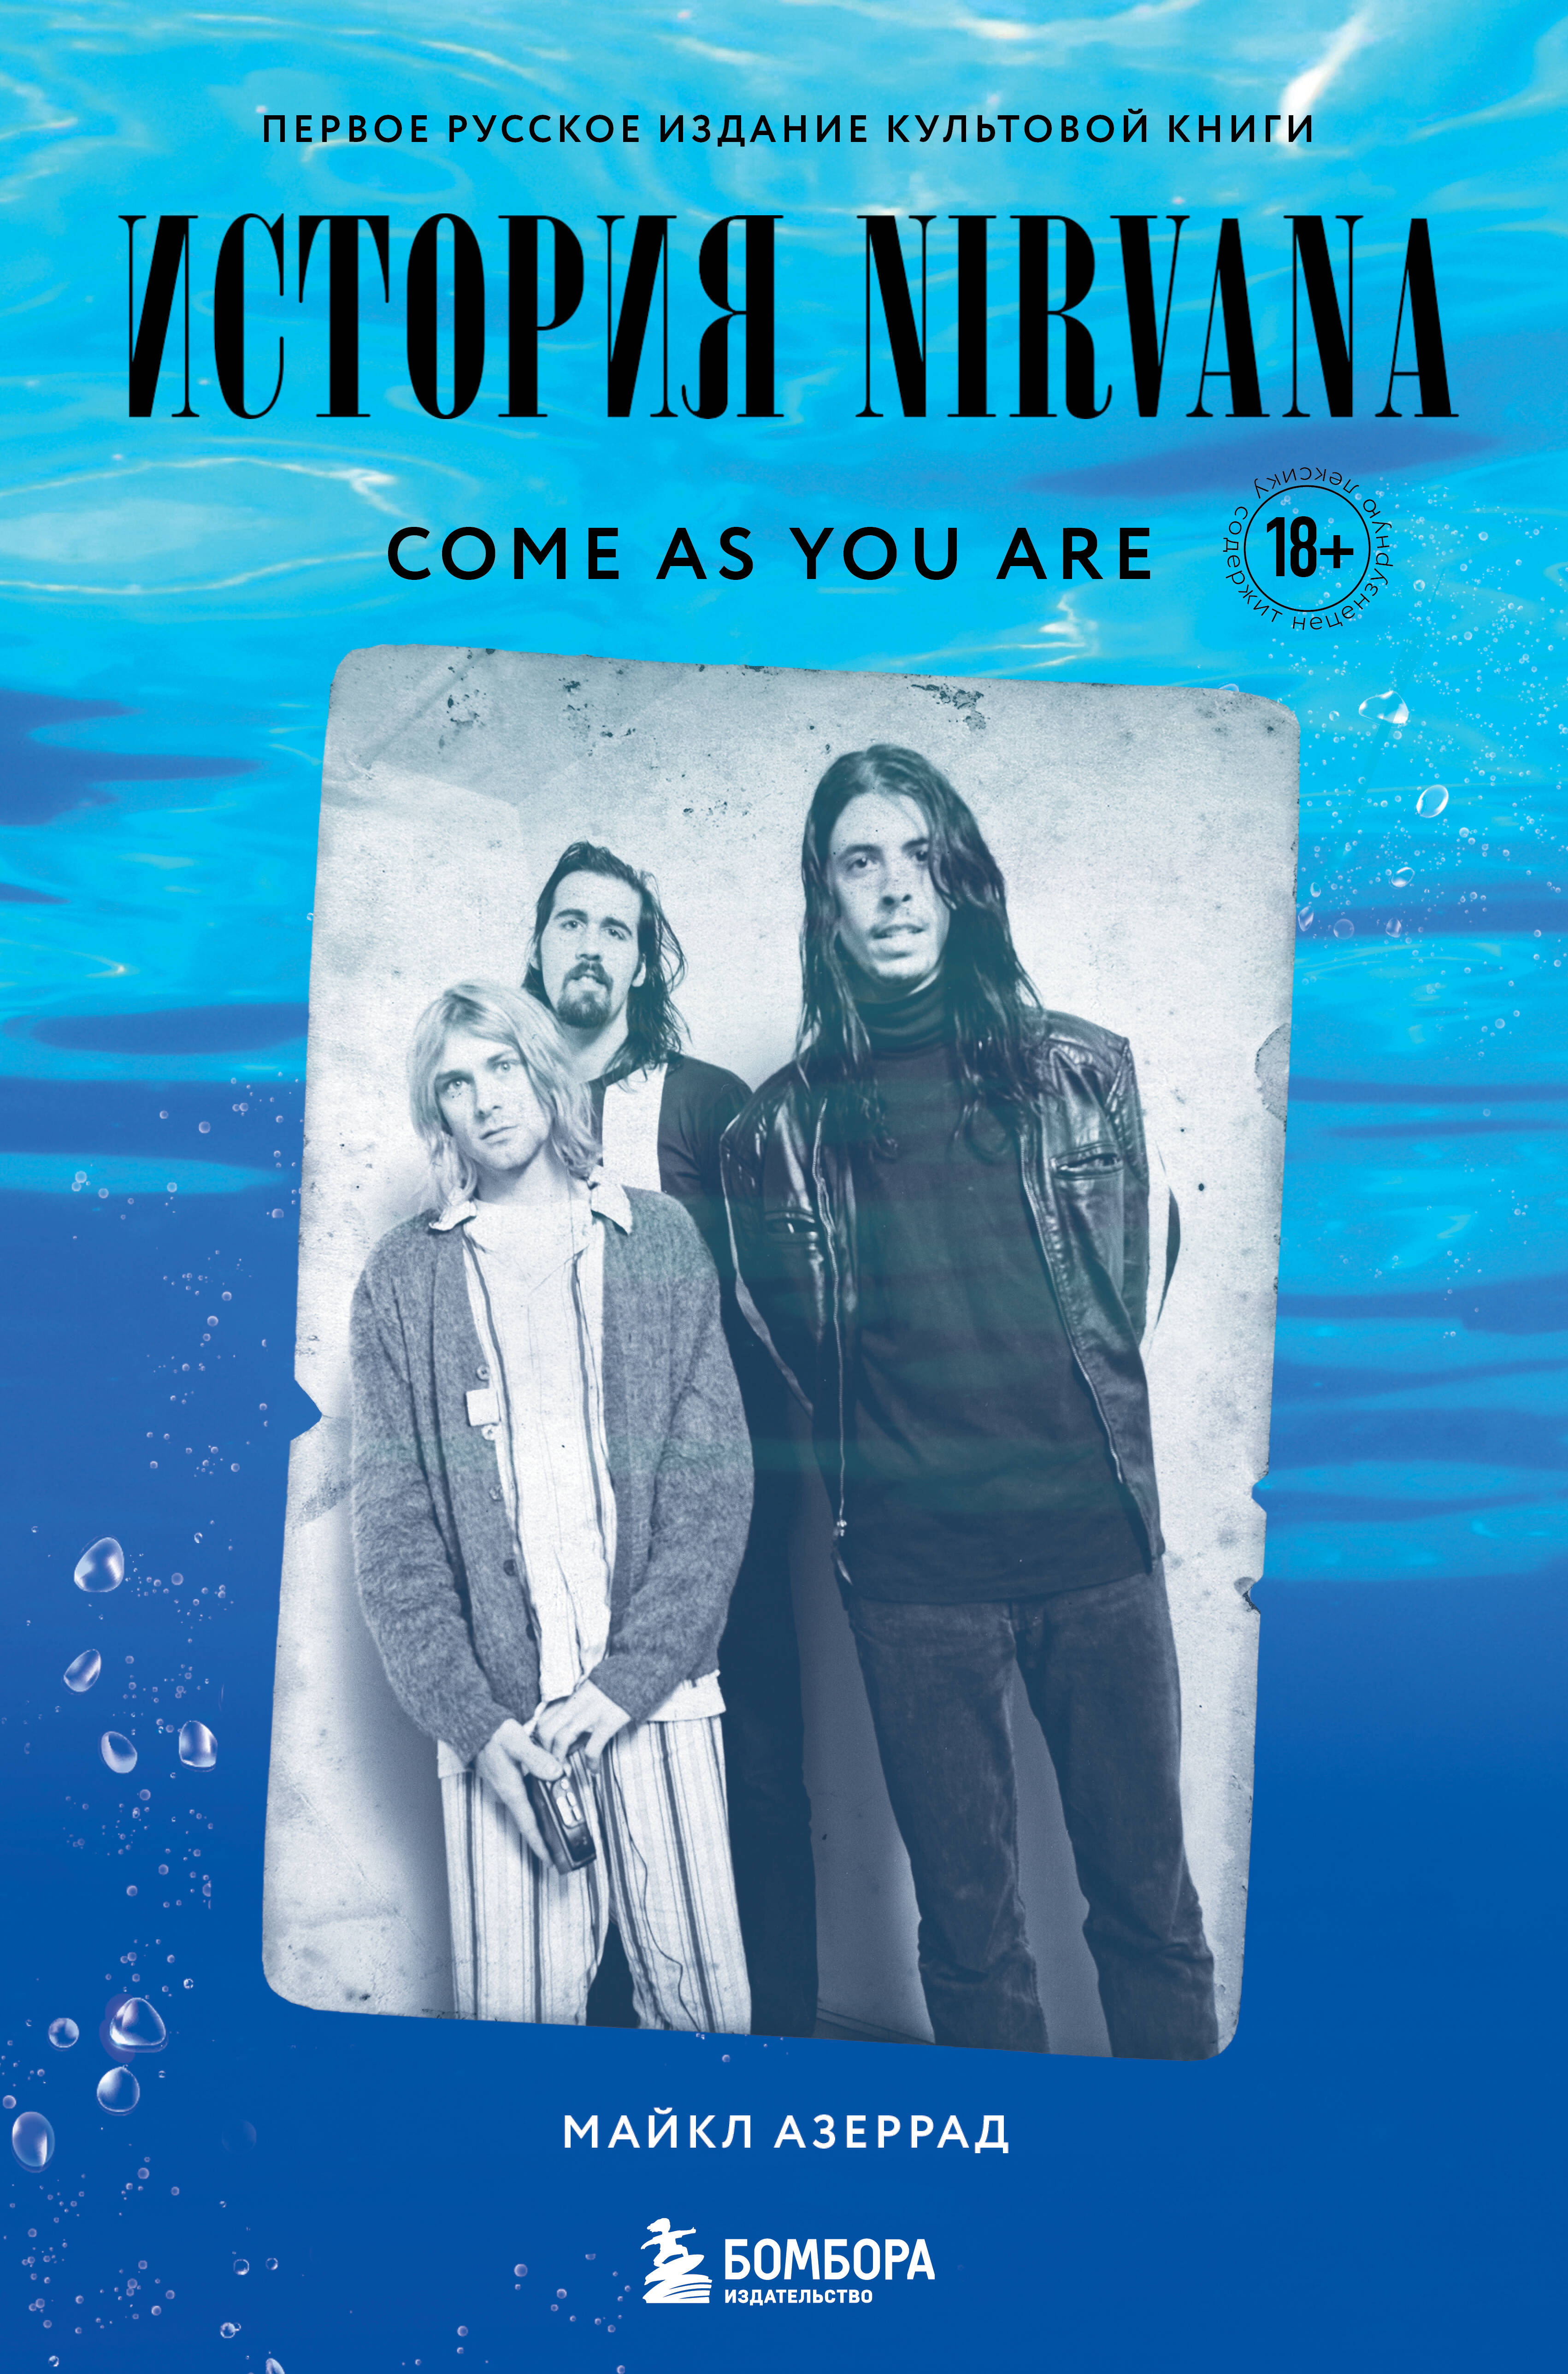 Come as you are:  Nirvana